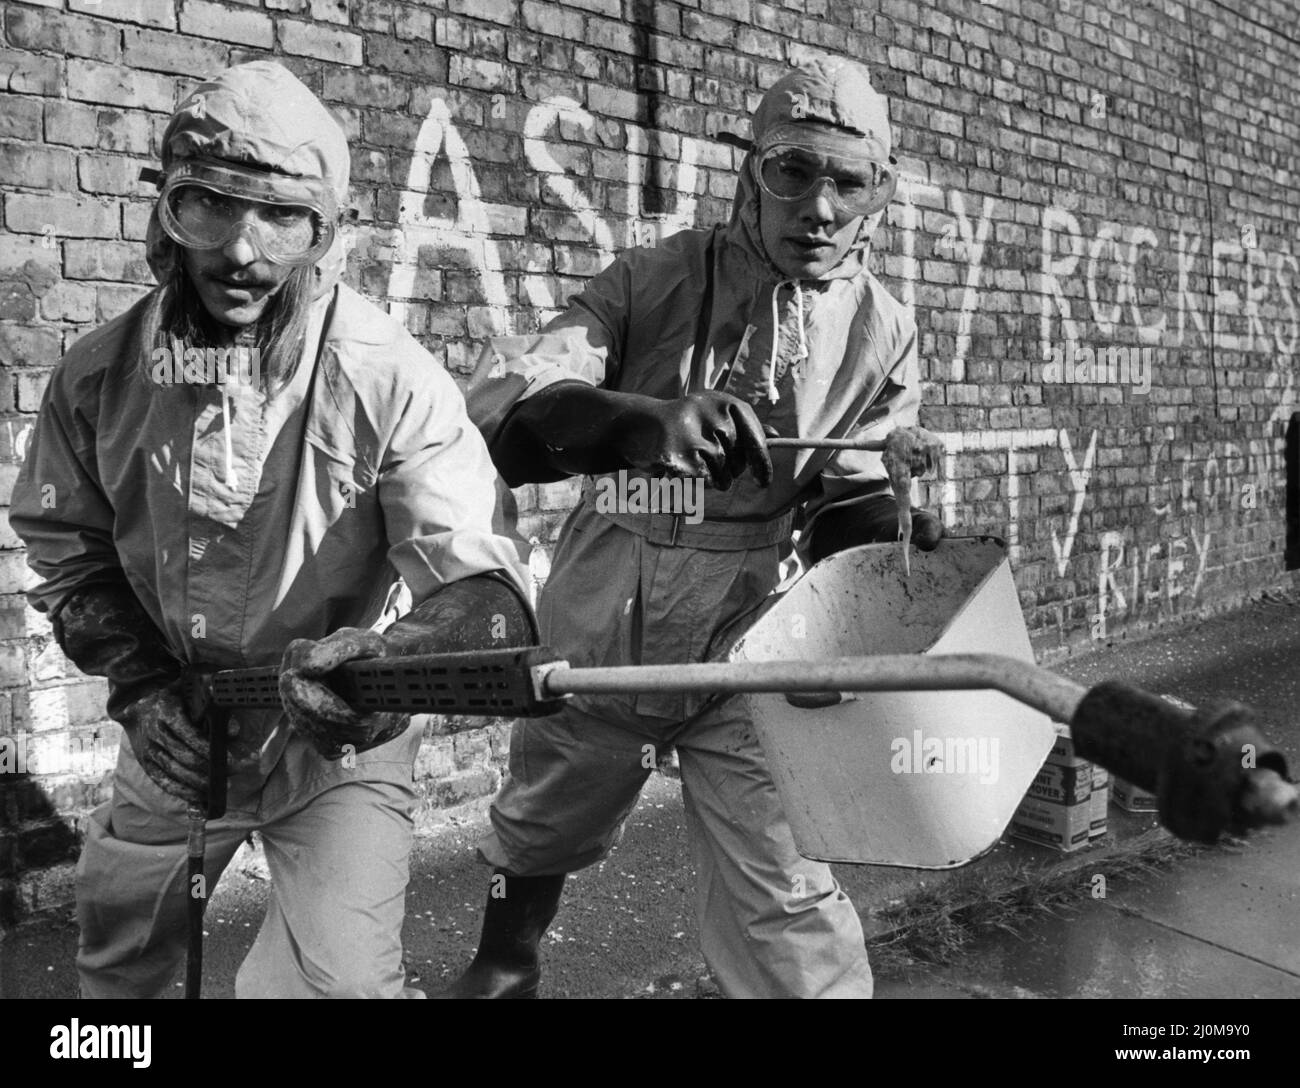 The Graffiti Beater, a new £2,000 machine has just gone into action in the West End of Newcastle, Published 24th September 1981.  With the help of youngsters on YOP Schemes, Youth Opportunities Programmes, clad in their space age protective suits, the machine will be cleaning up Graffiti on walls and buildings around the area.   The machine uses a special solvent and high pressure hose. Stock Photo